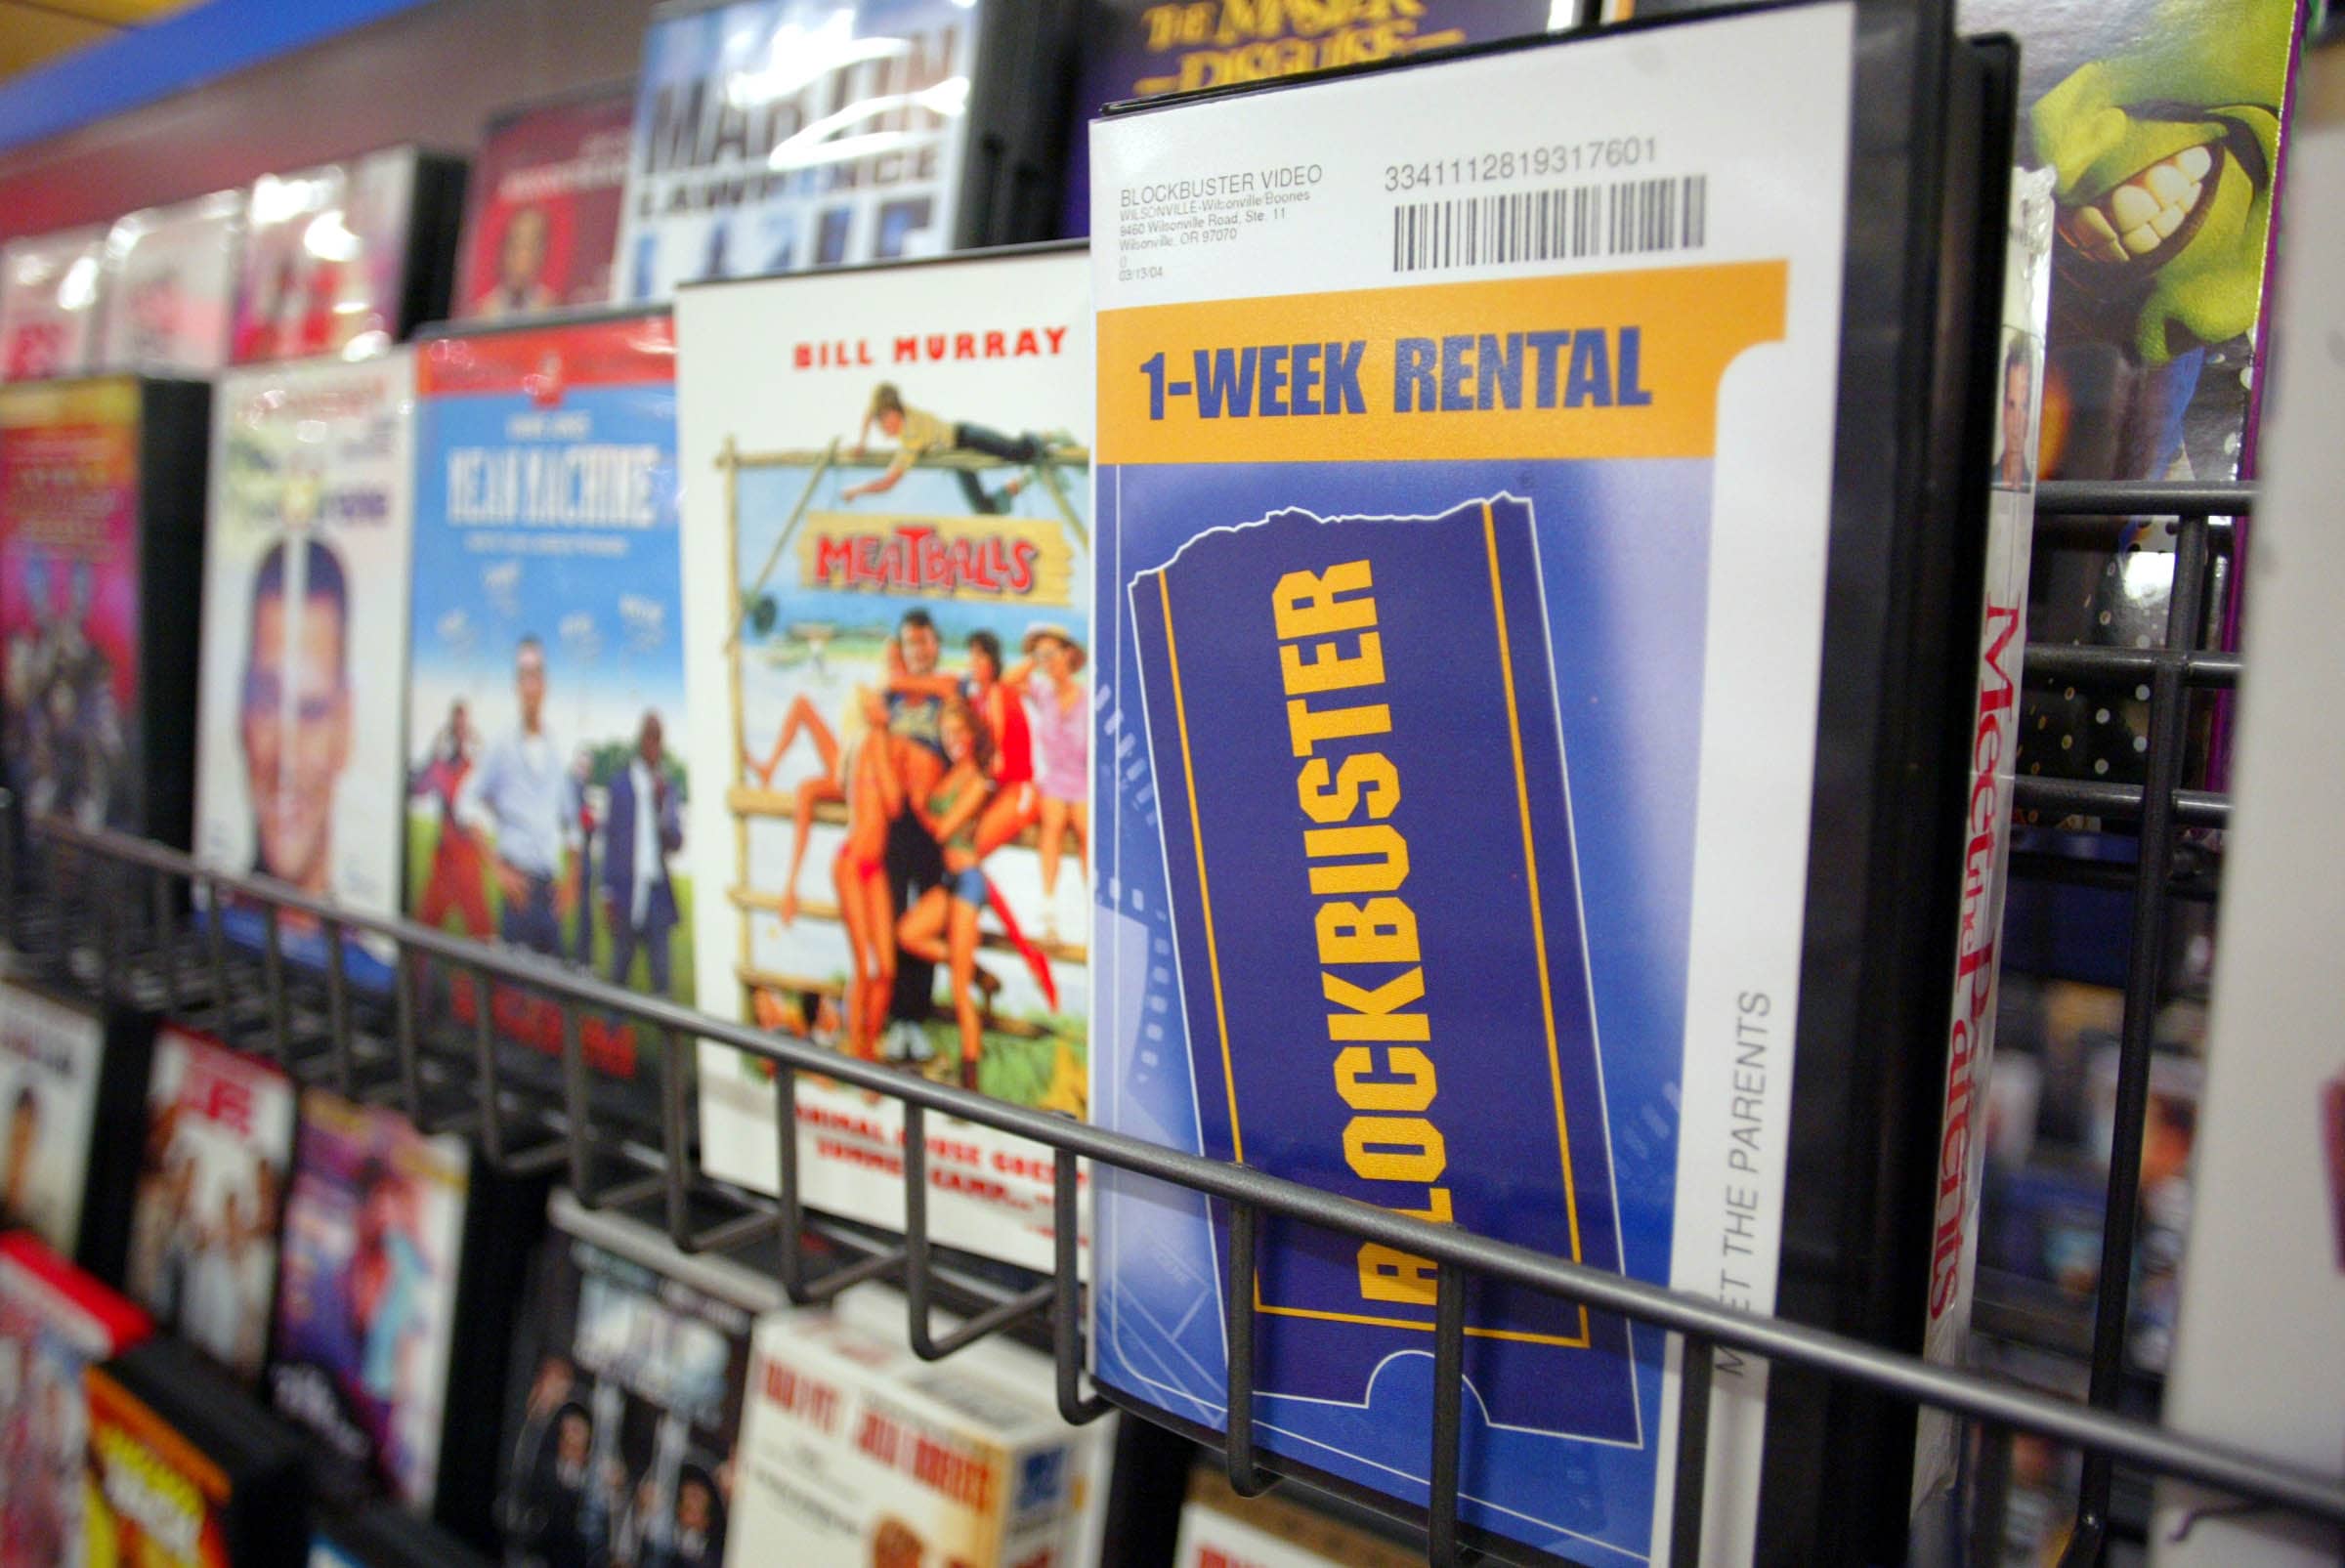 How Netflix almost lost the movie rental wars to Blockbuster